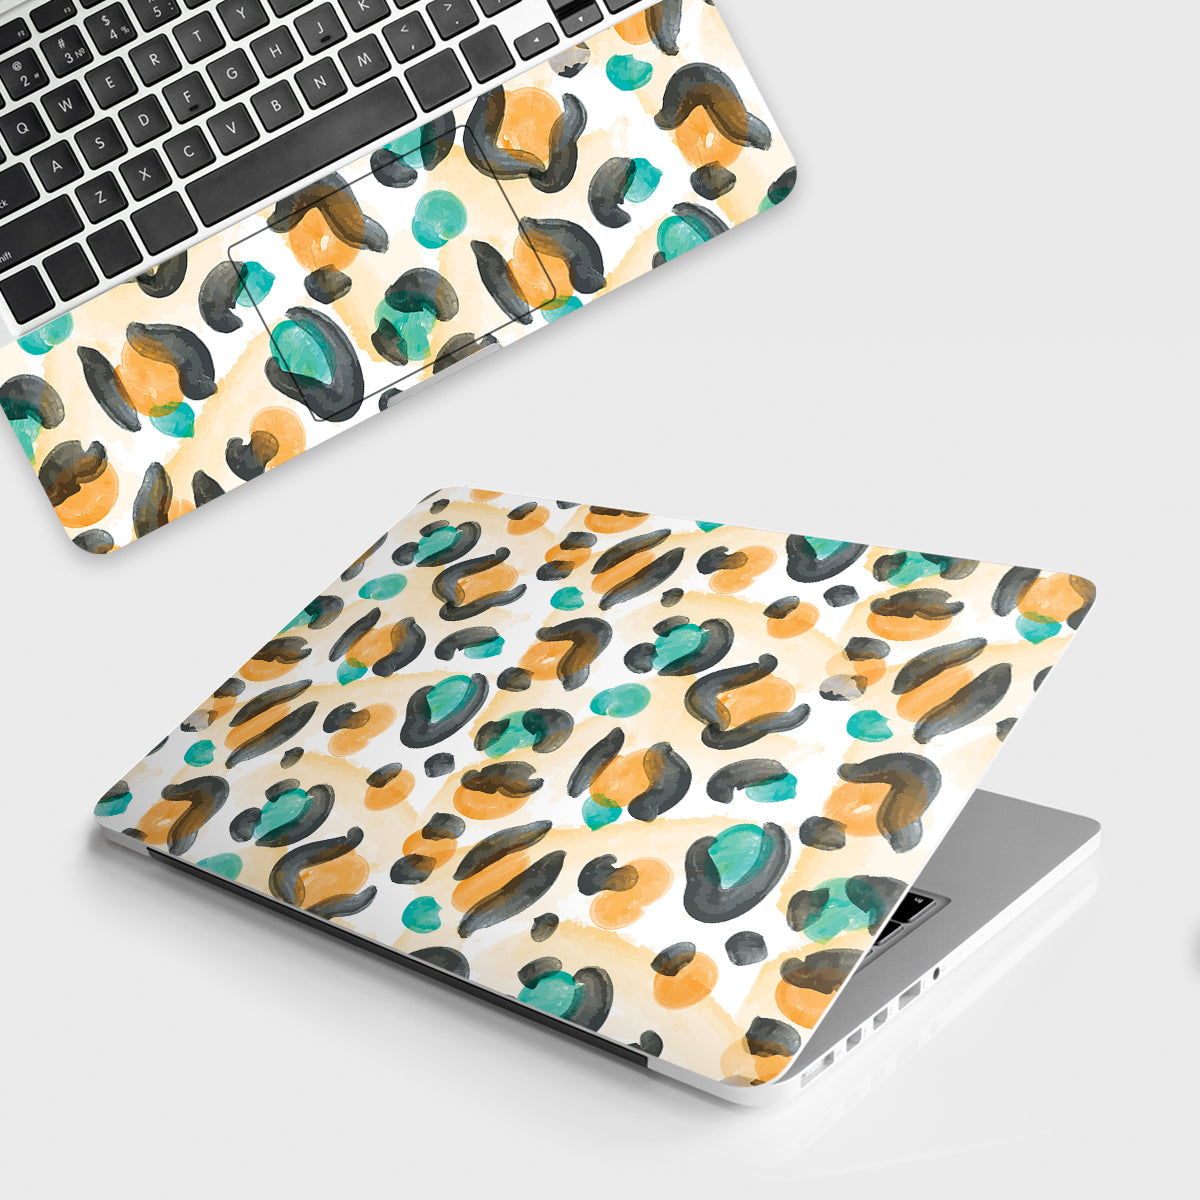 Fomo Store Laptop Skins Miscellaneous Colorful Spotted